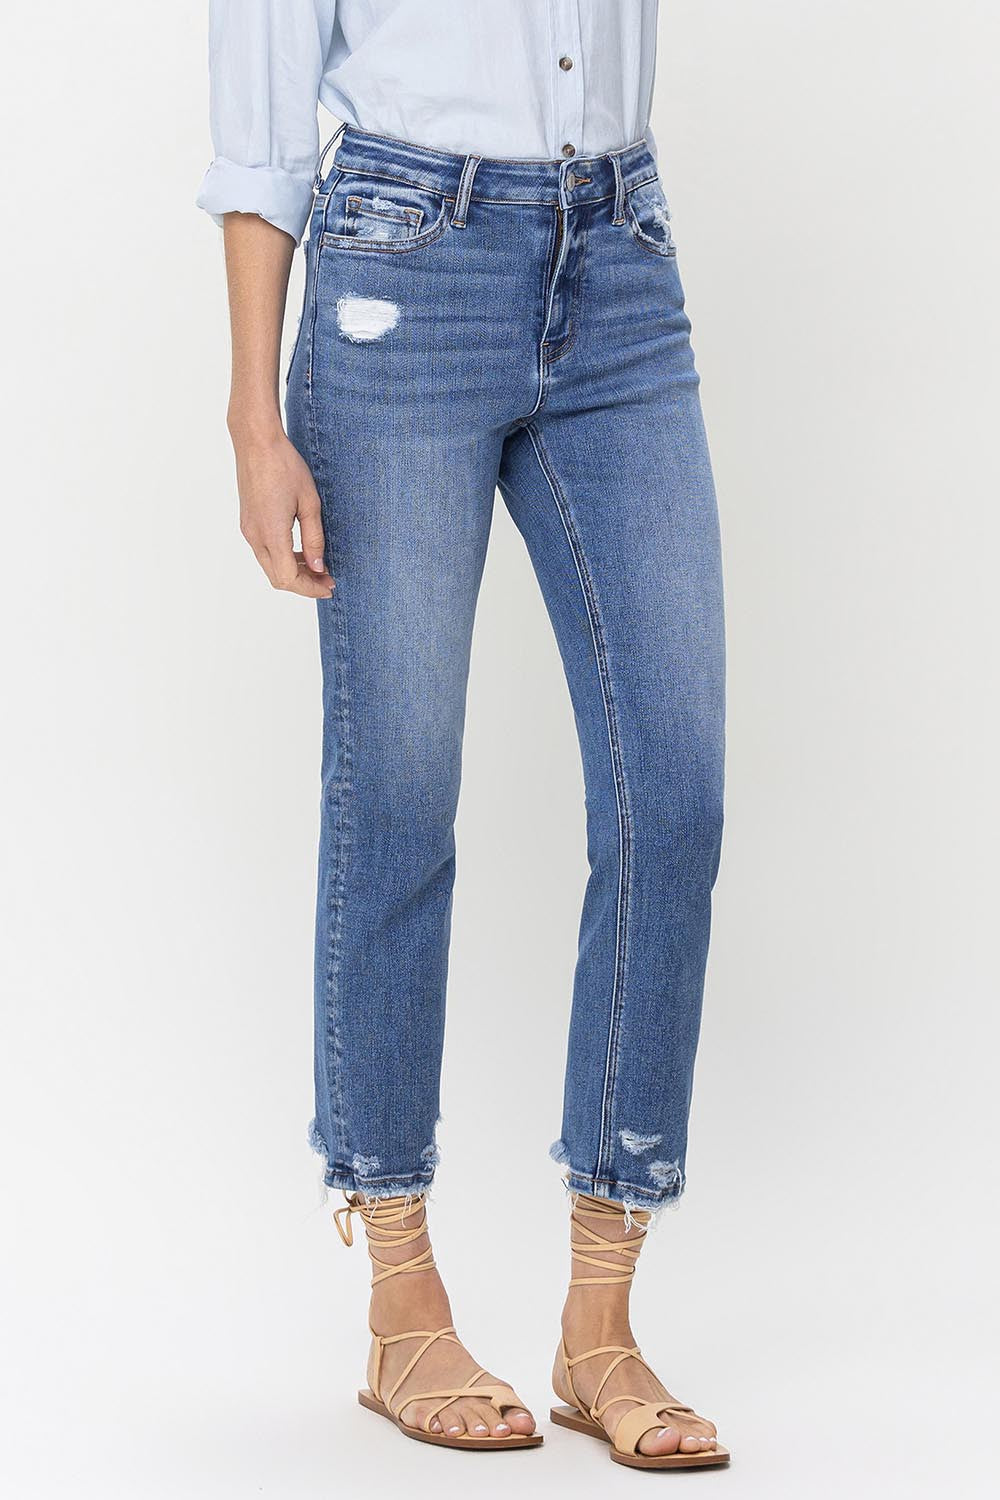 The High Rise Raw Hem Straight Jeans are a stylish and versatile choice. With their high-rise fit, they provide a flattering silhouette. The raw hem adds a trendy and edgy touch to any outfit. Made from high-quality denim, they are durable and comfortable to wear. These jeans are perfect for both casual and dressier occasions.  24 -32